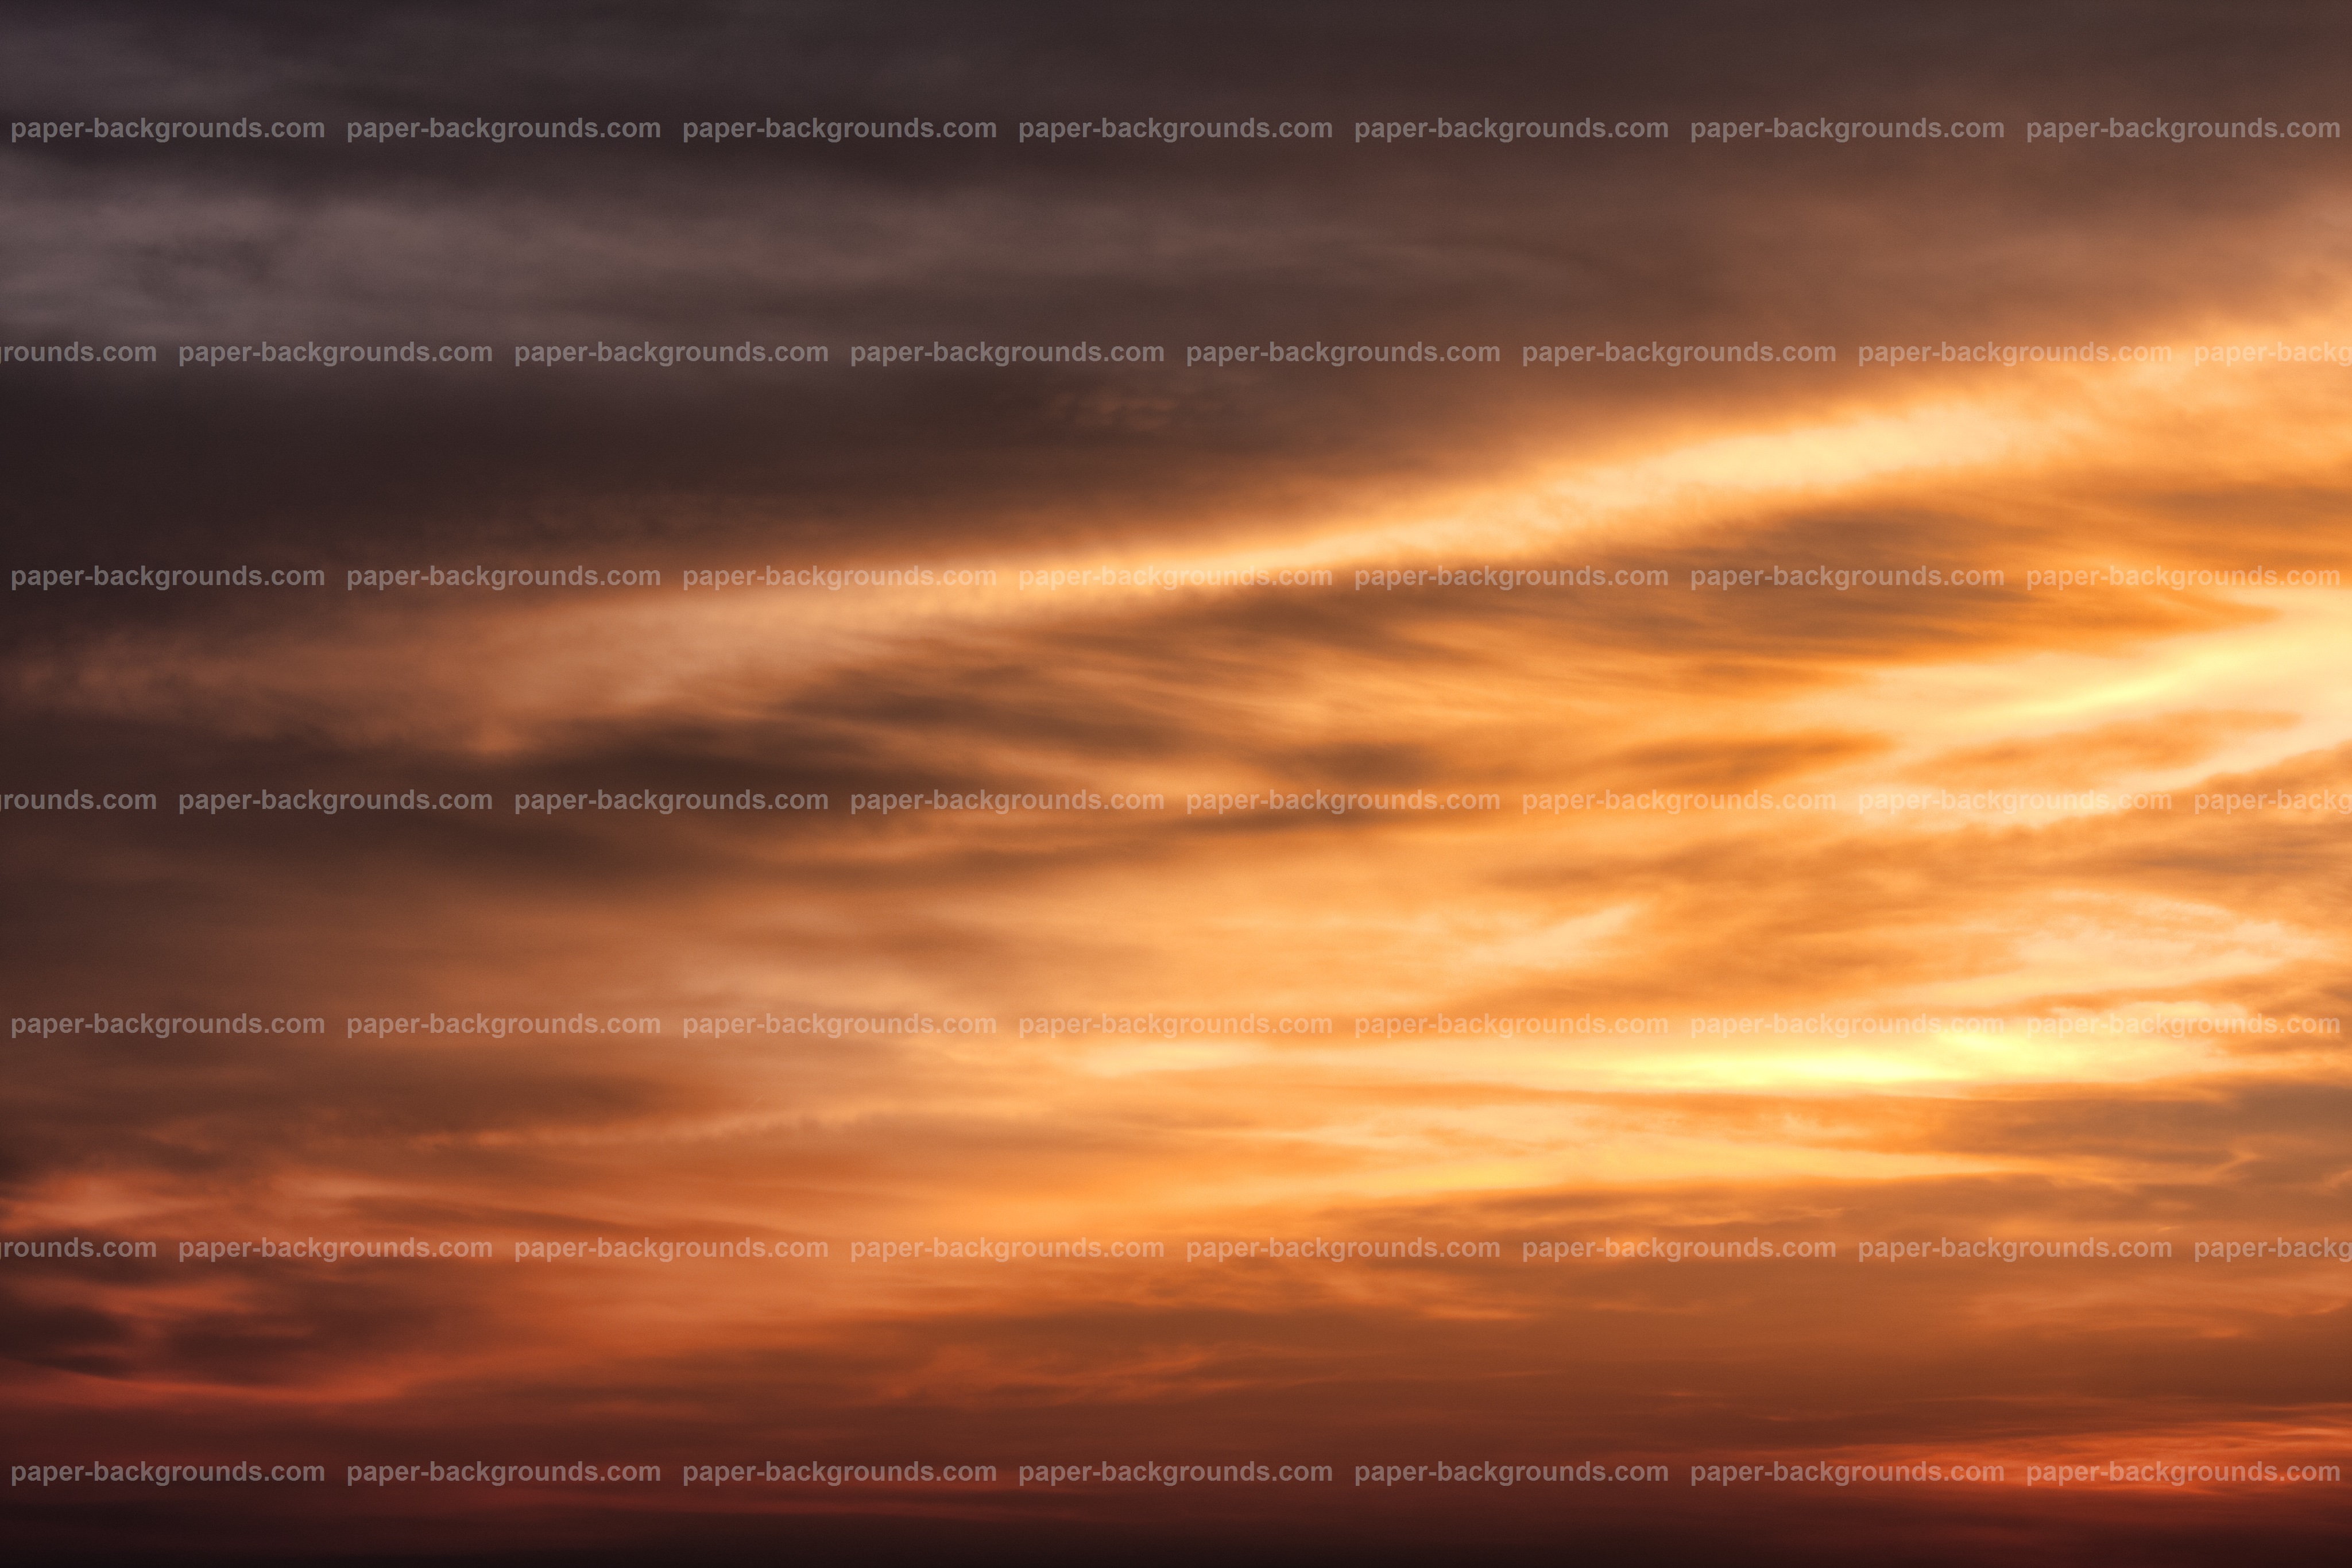 Paper Backgrounds | Sunset Dramatic Sky Clouds Background